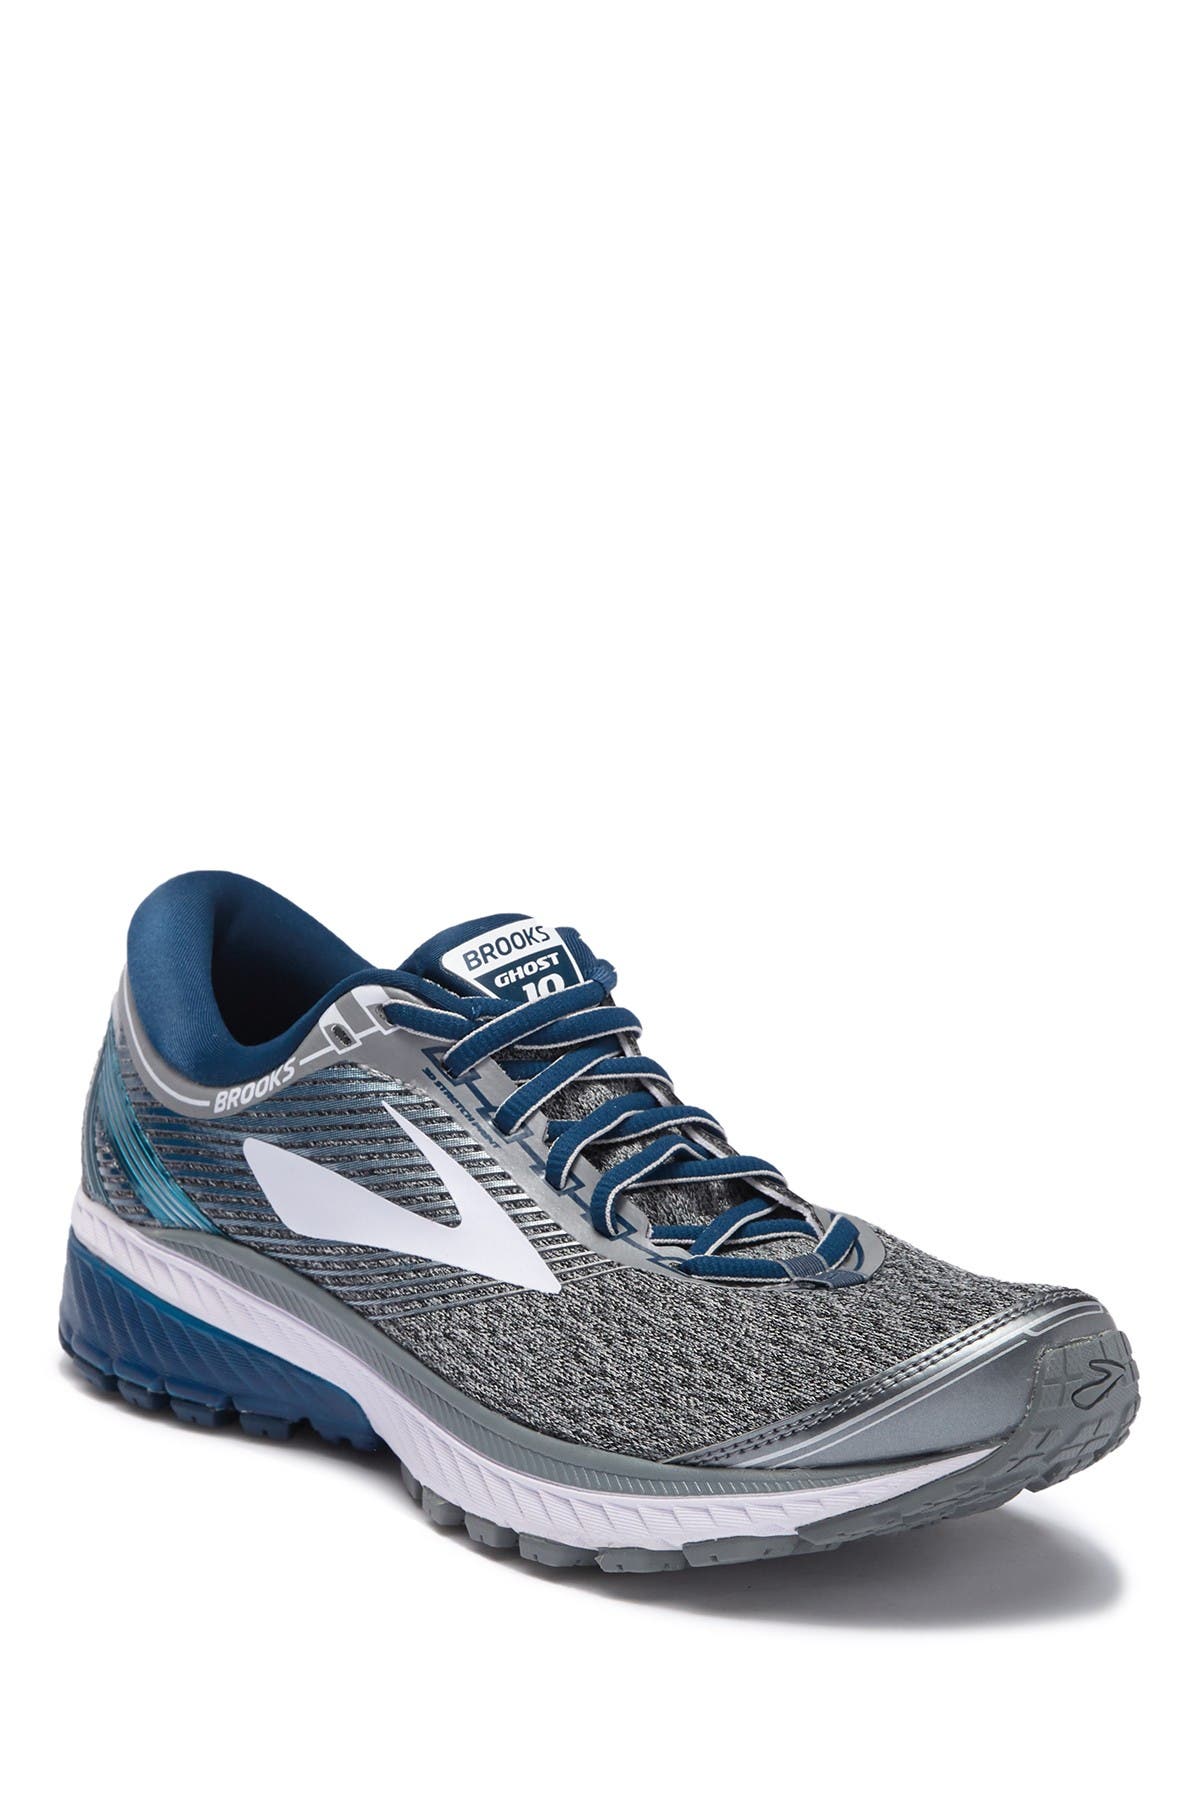 brooks ghost 10 womens 7.5 wide